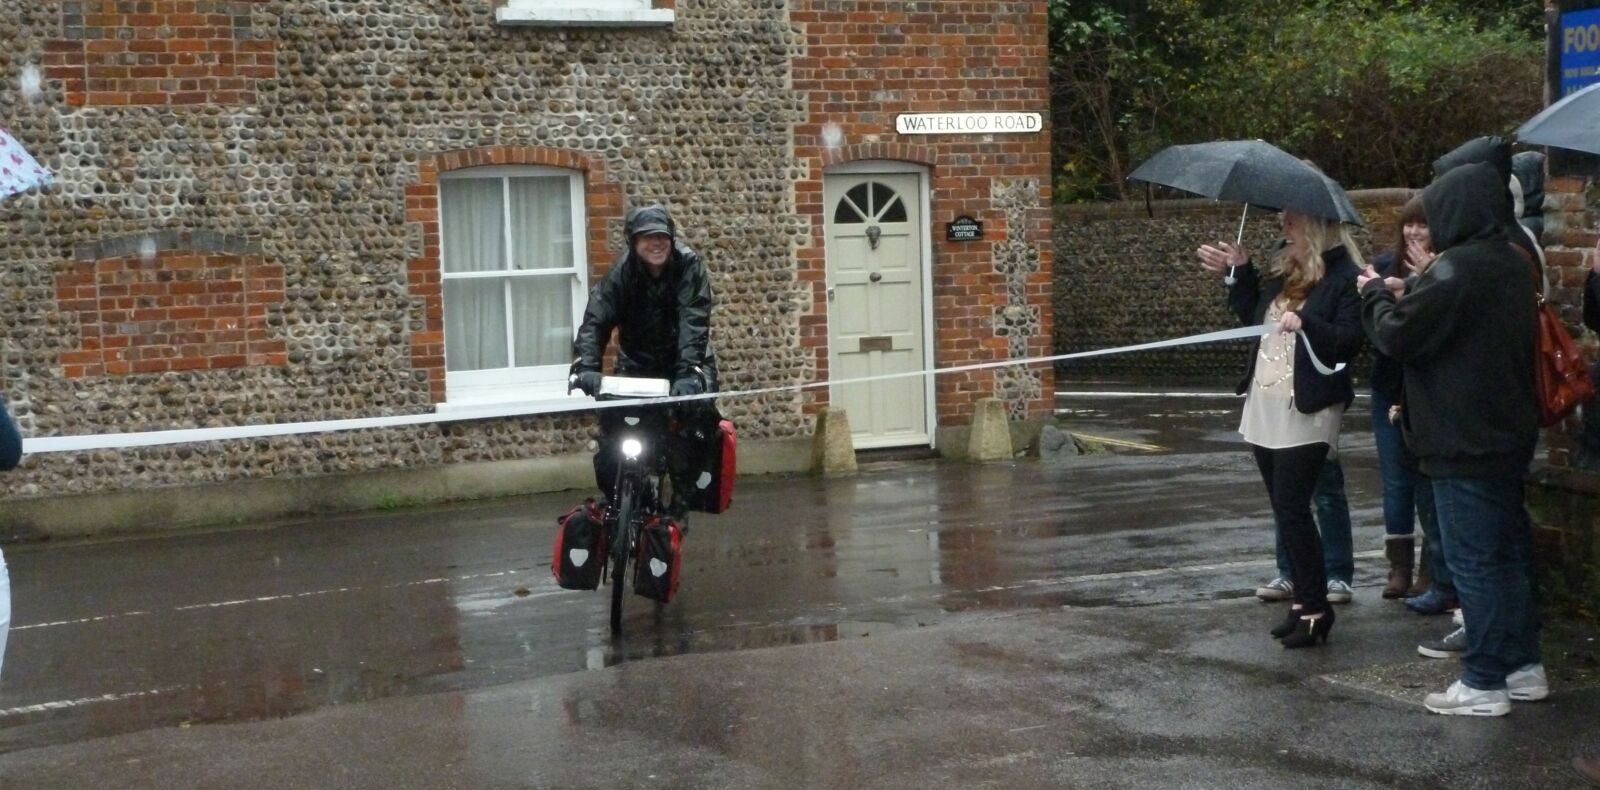 Garry McGivern on his touring bike in the rain